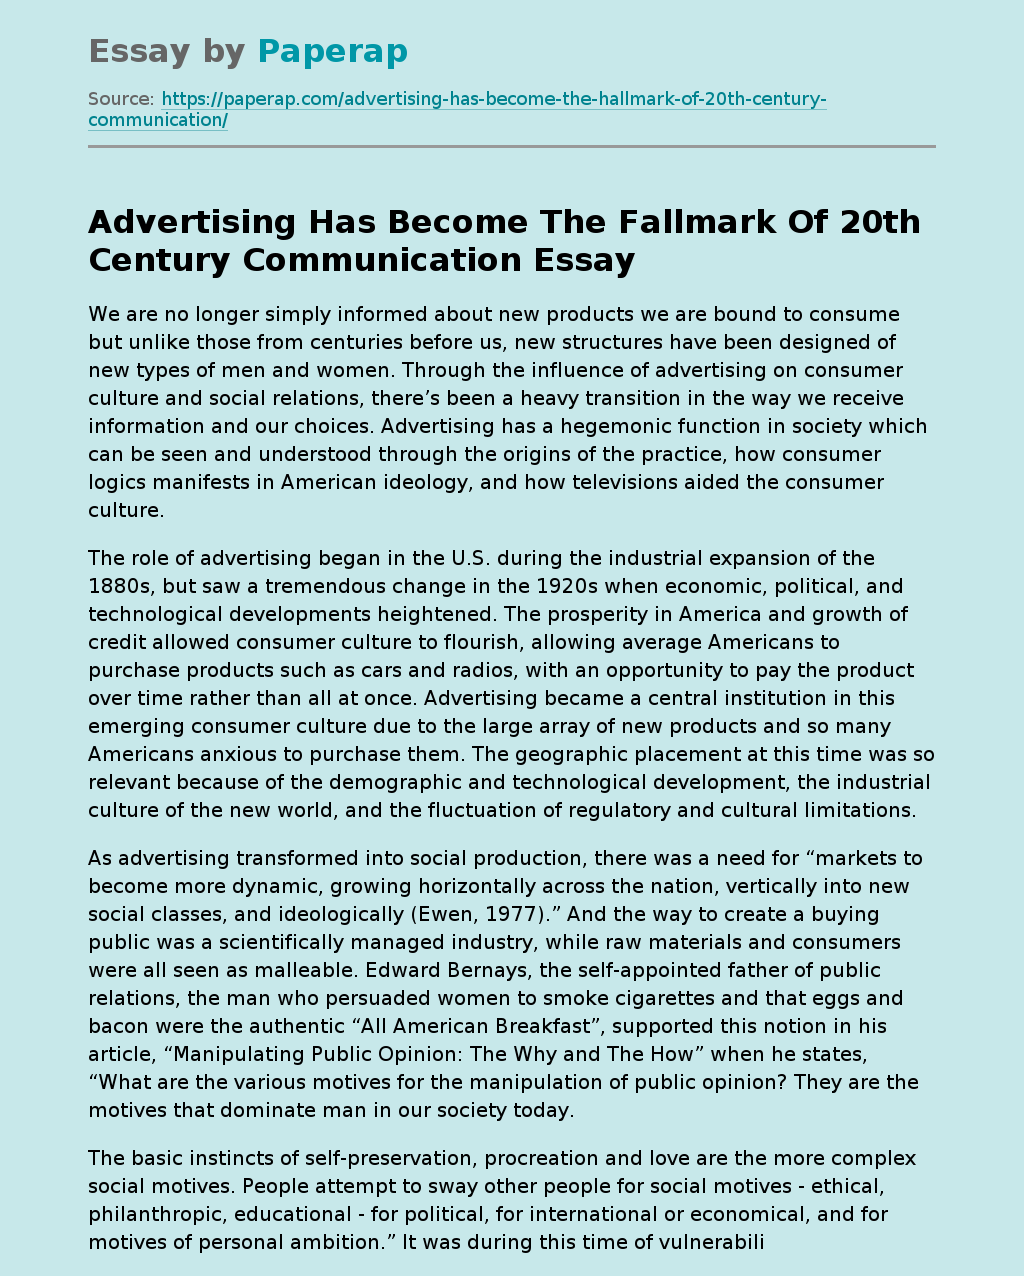 Advertising Has Become The Fallmark Of 20th Century Communication